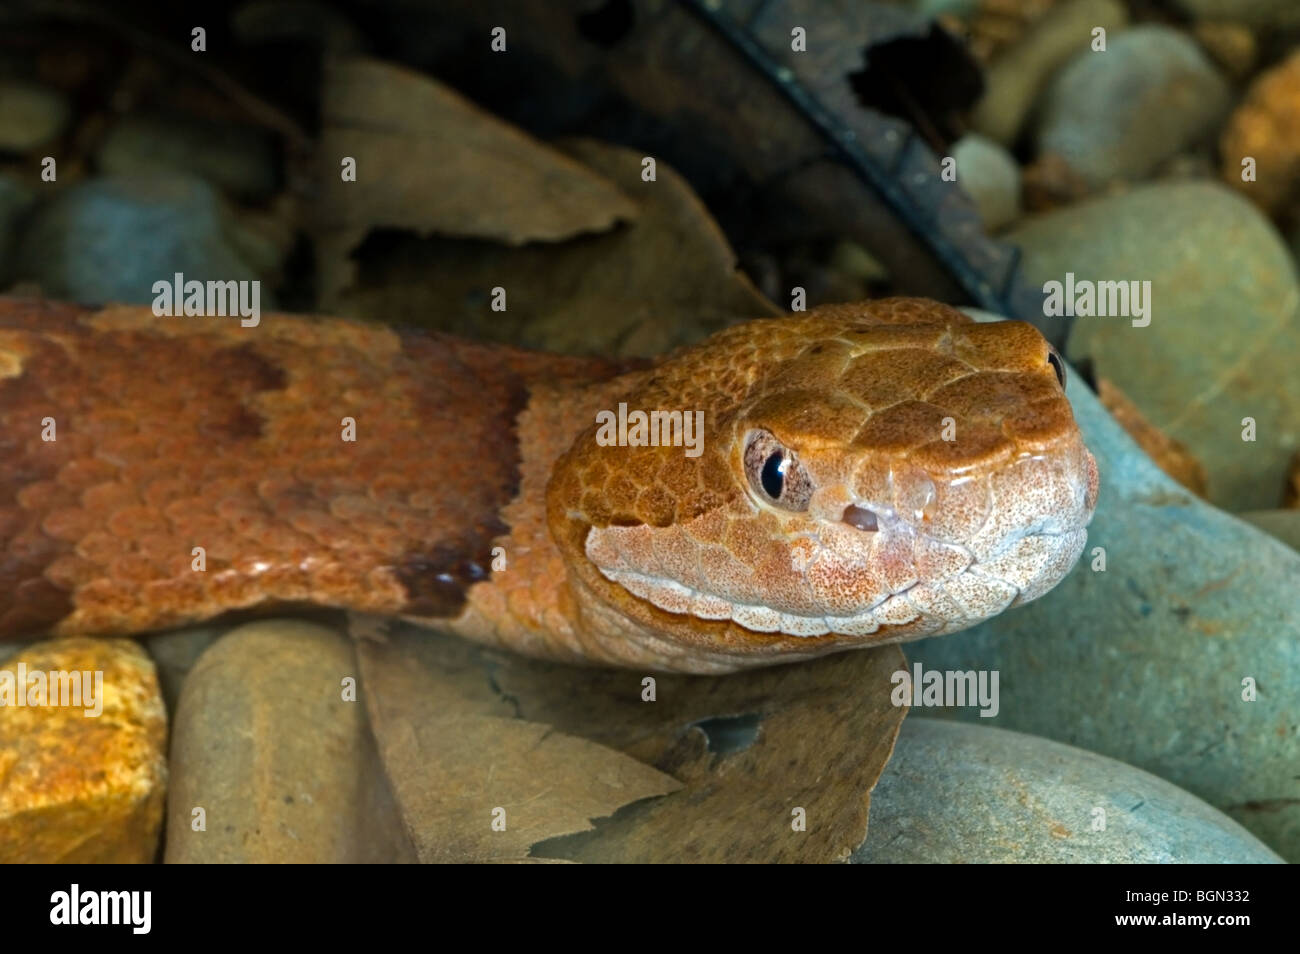 Close up of the venomous pitviper species Broad-banded copperhead (Agkistrodon contortrix laticinctus), southern United States Stock Photo